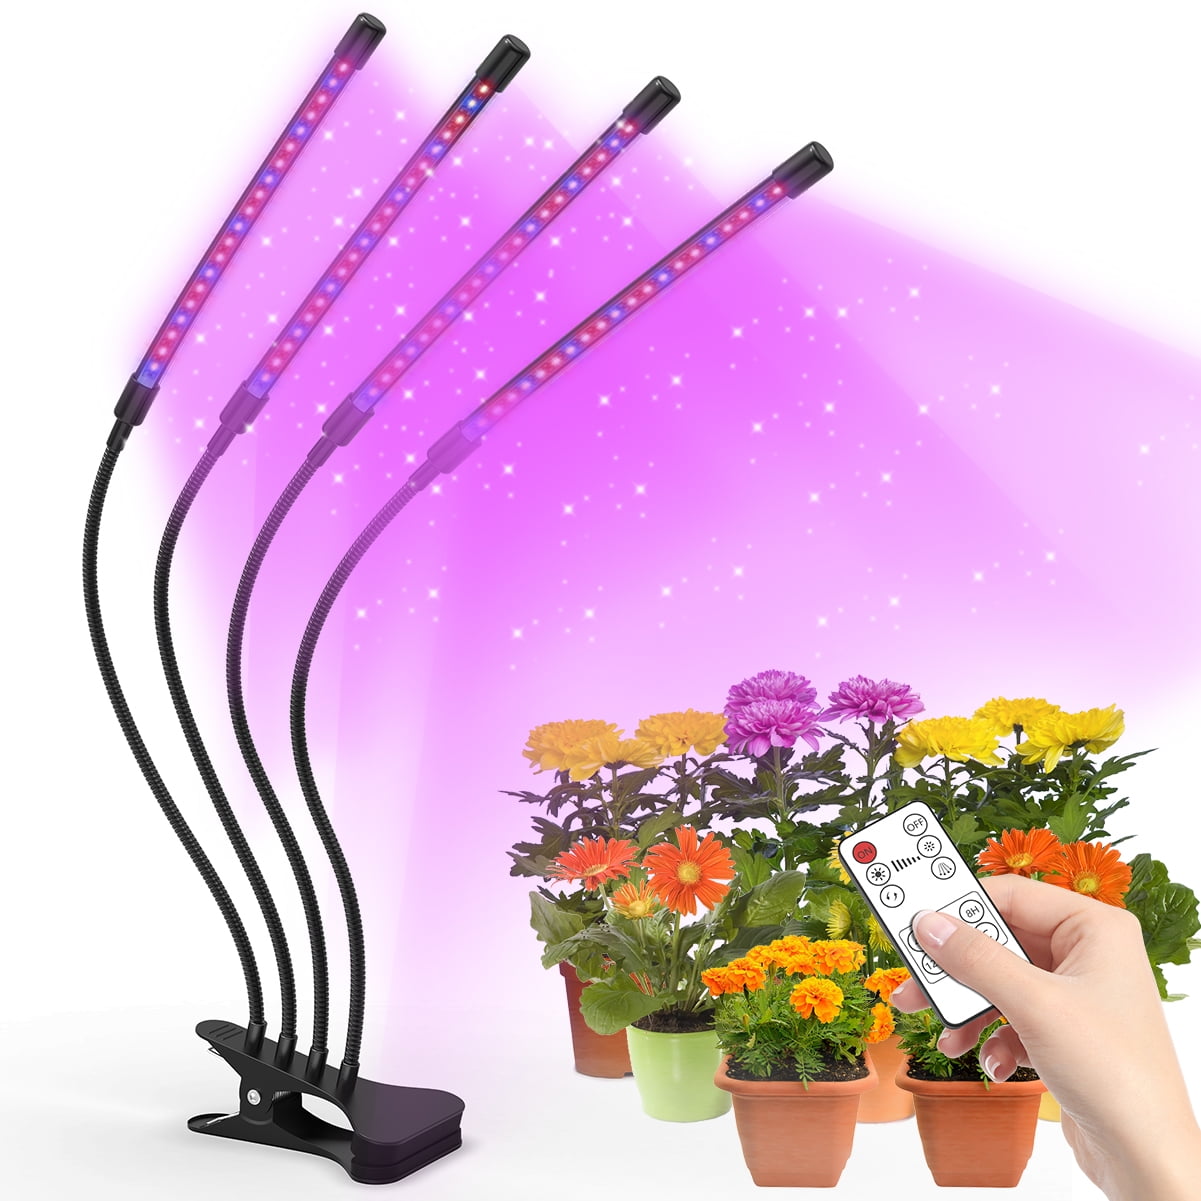 Details about   Grow Light Plant Growing LED Lamp Indoor Plants Hydroponics Timing Dimming US 